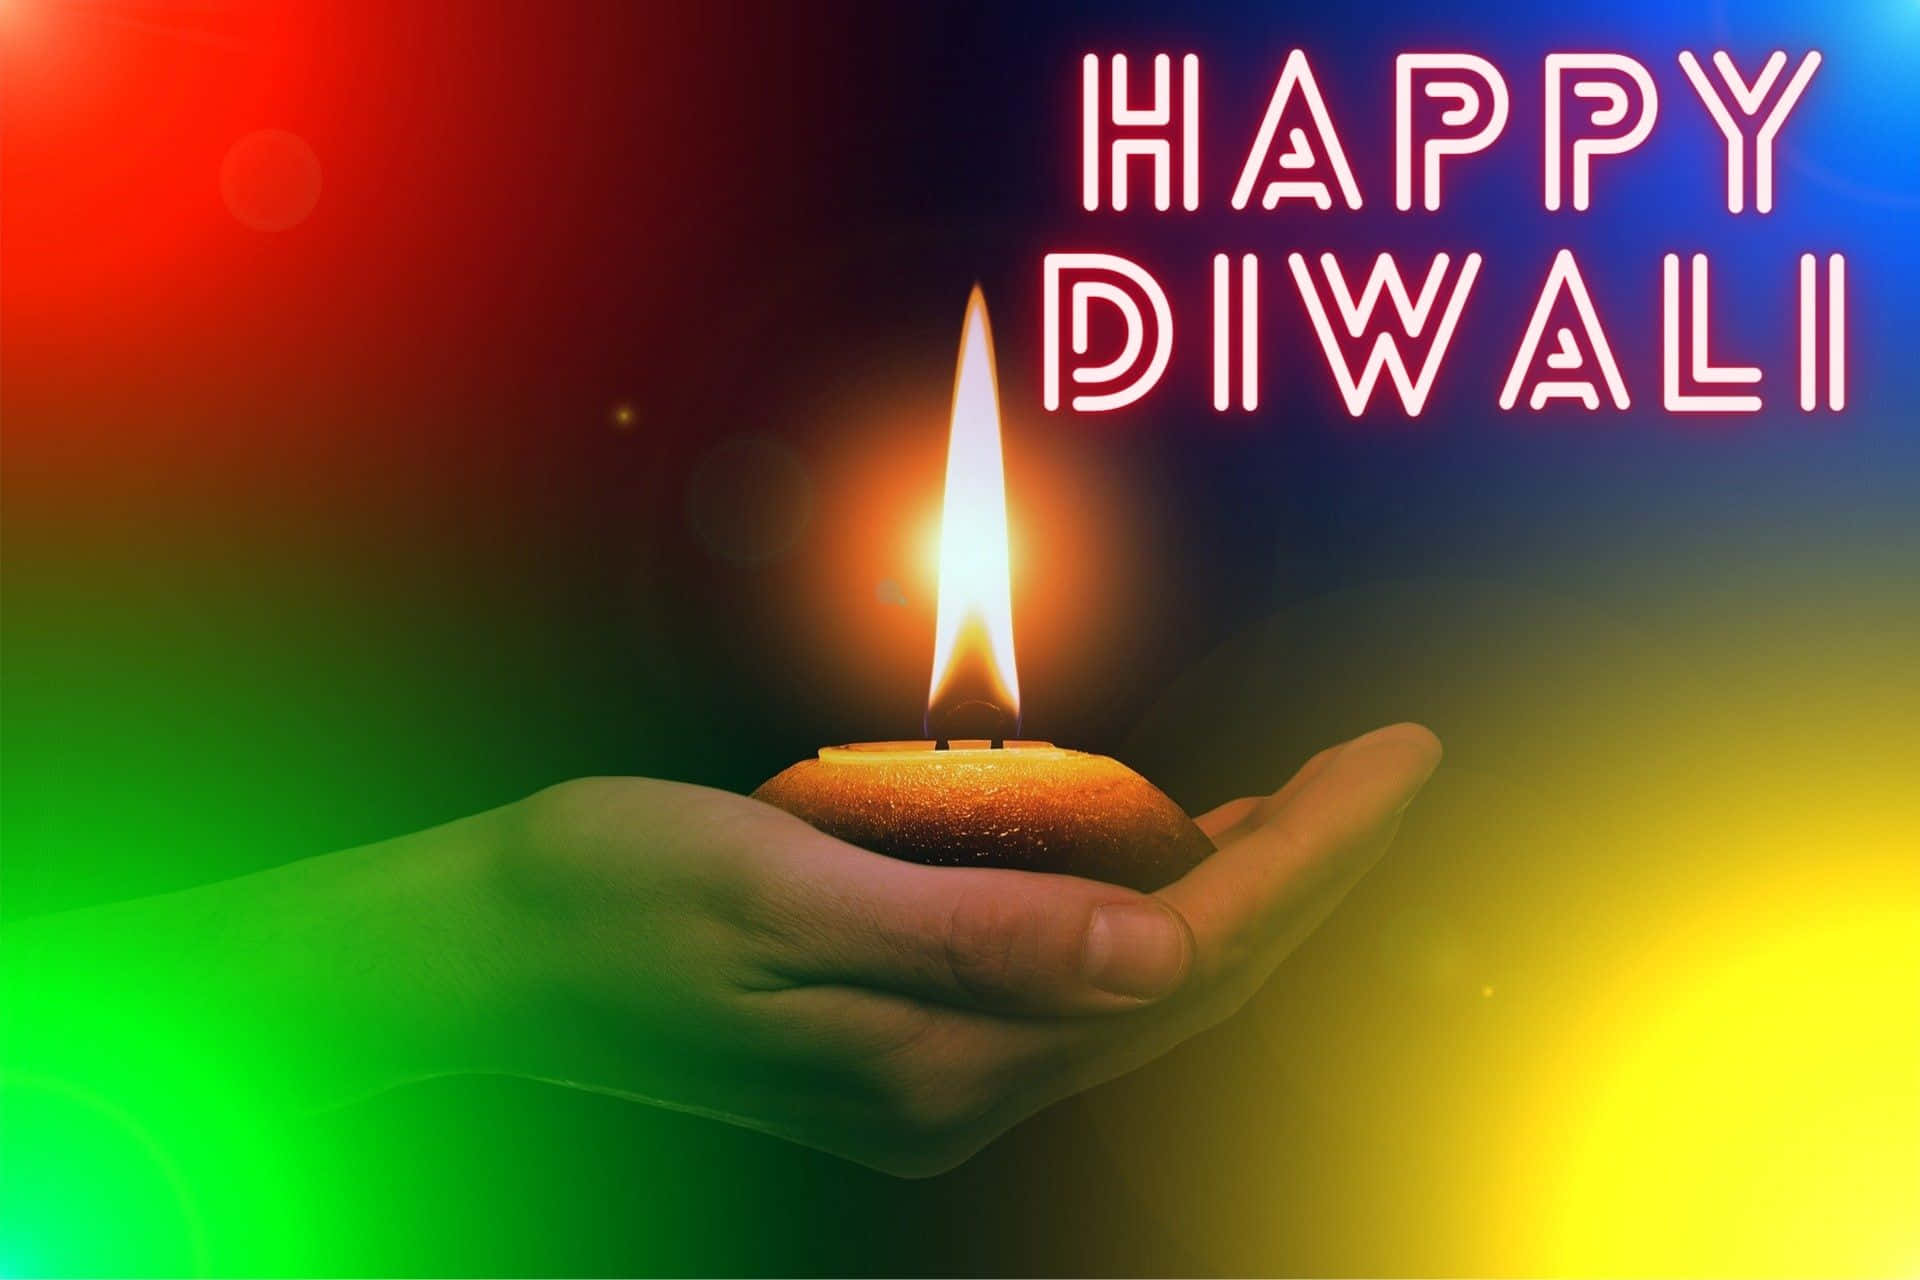 “Wishing you a very happy and prosperous Diwali”